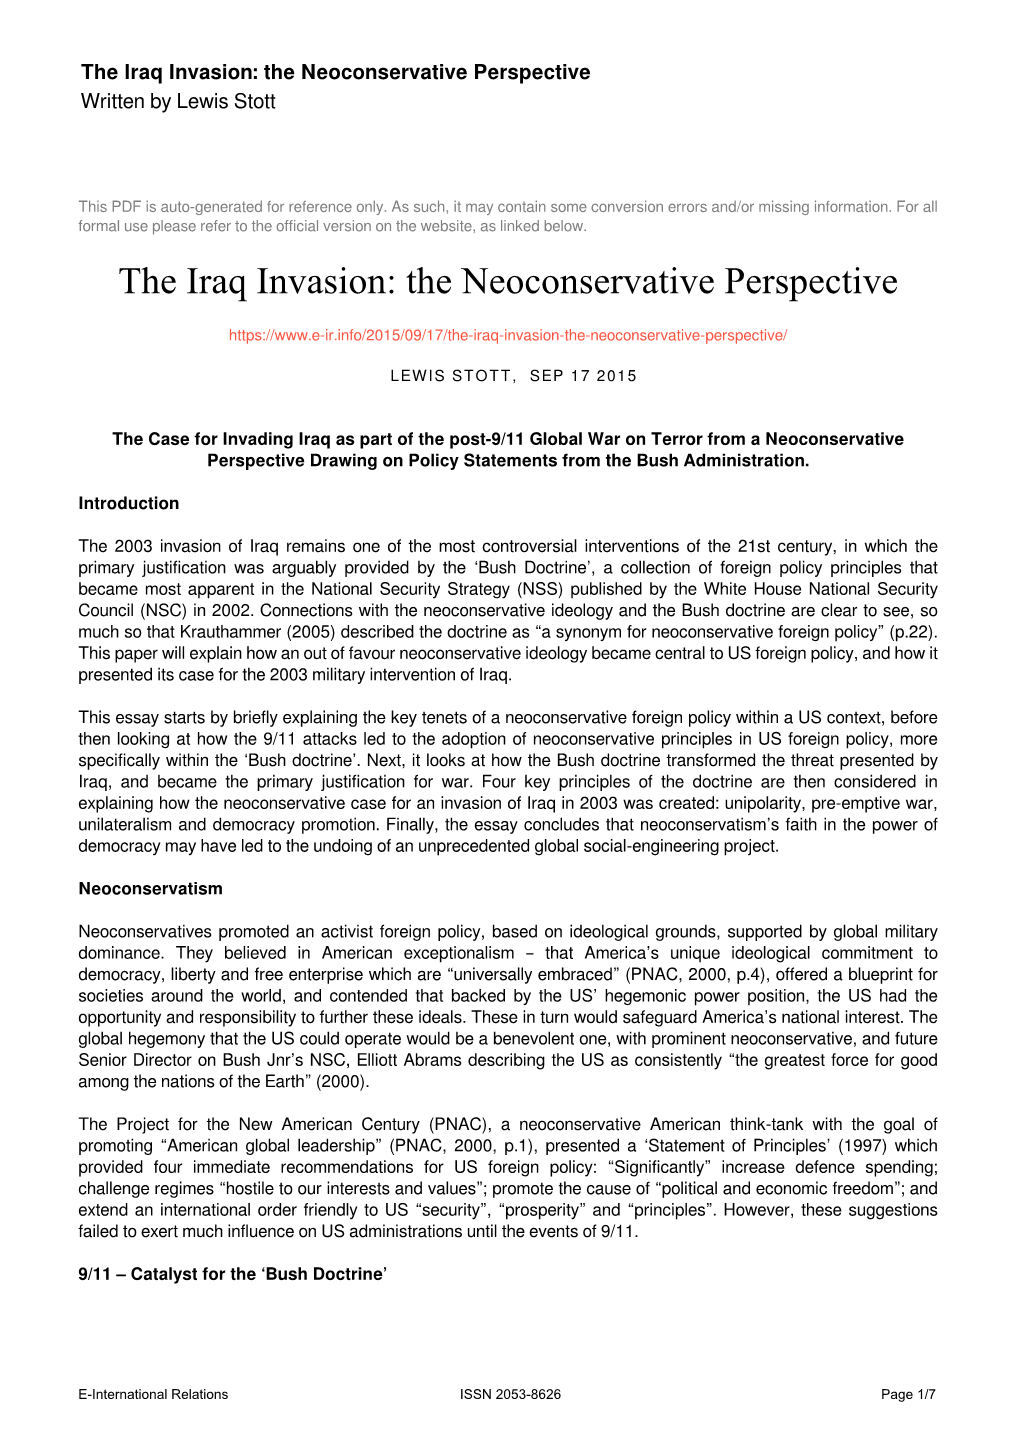 The Iraq Invasion: the Neoconservative Perspective Written by Lewis Stott